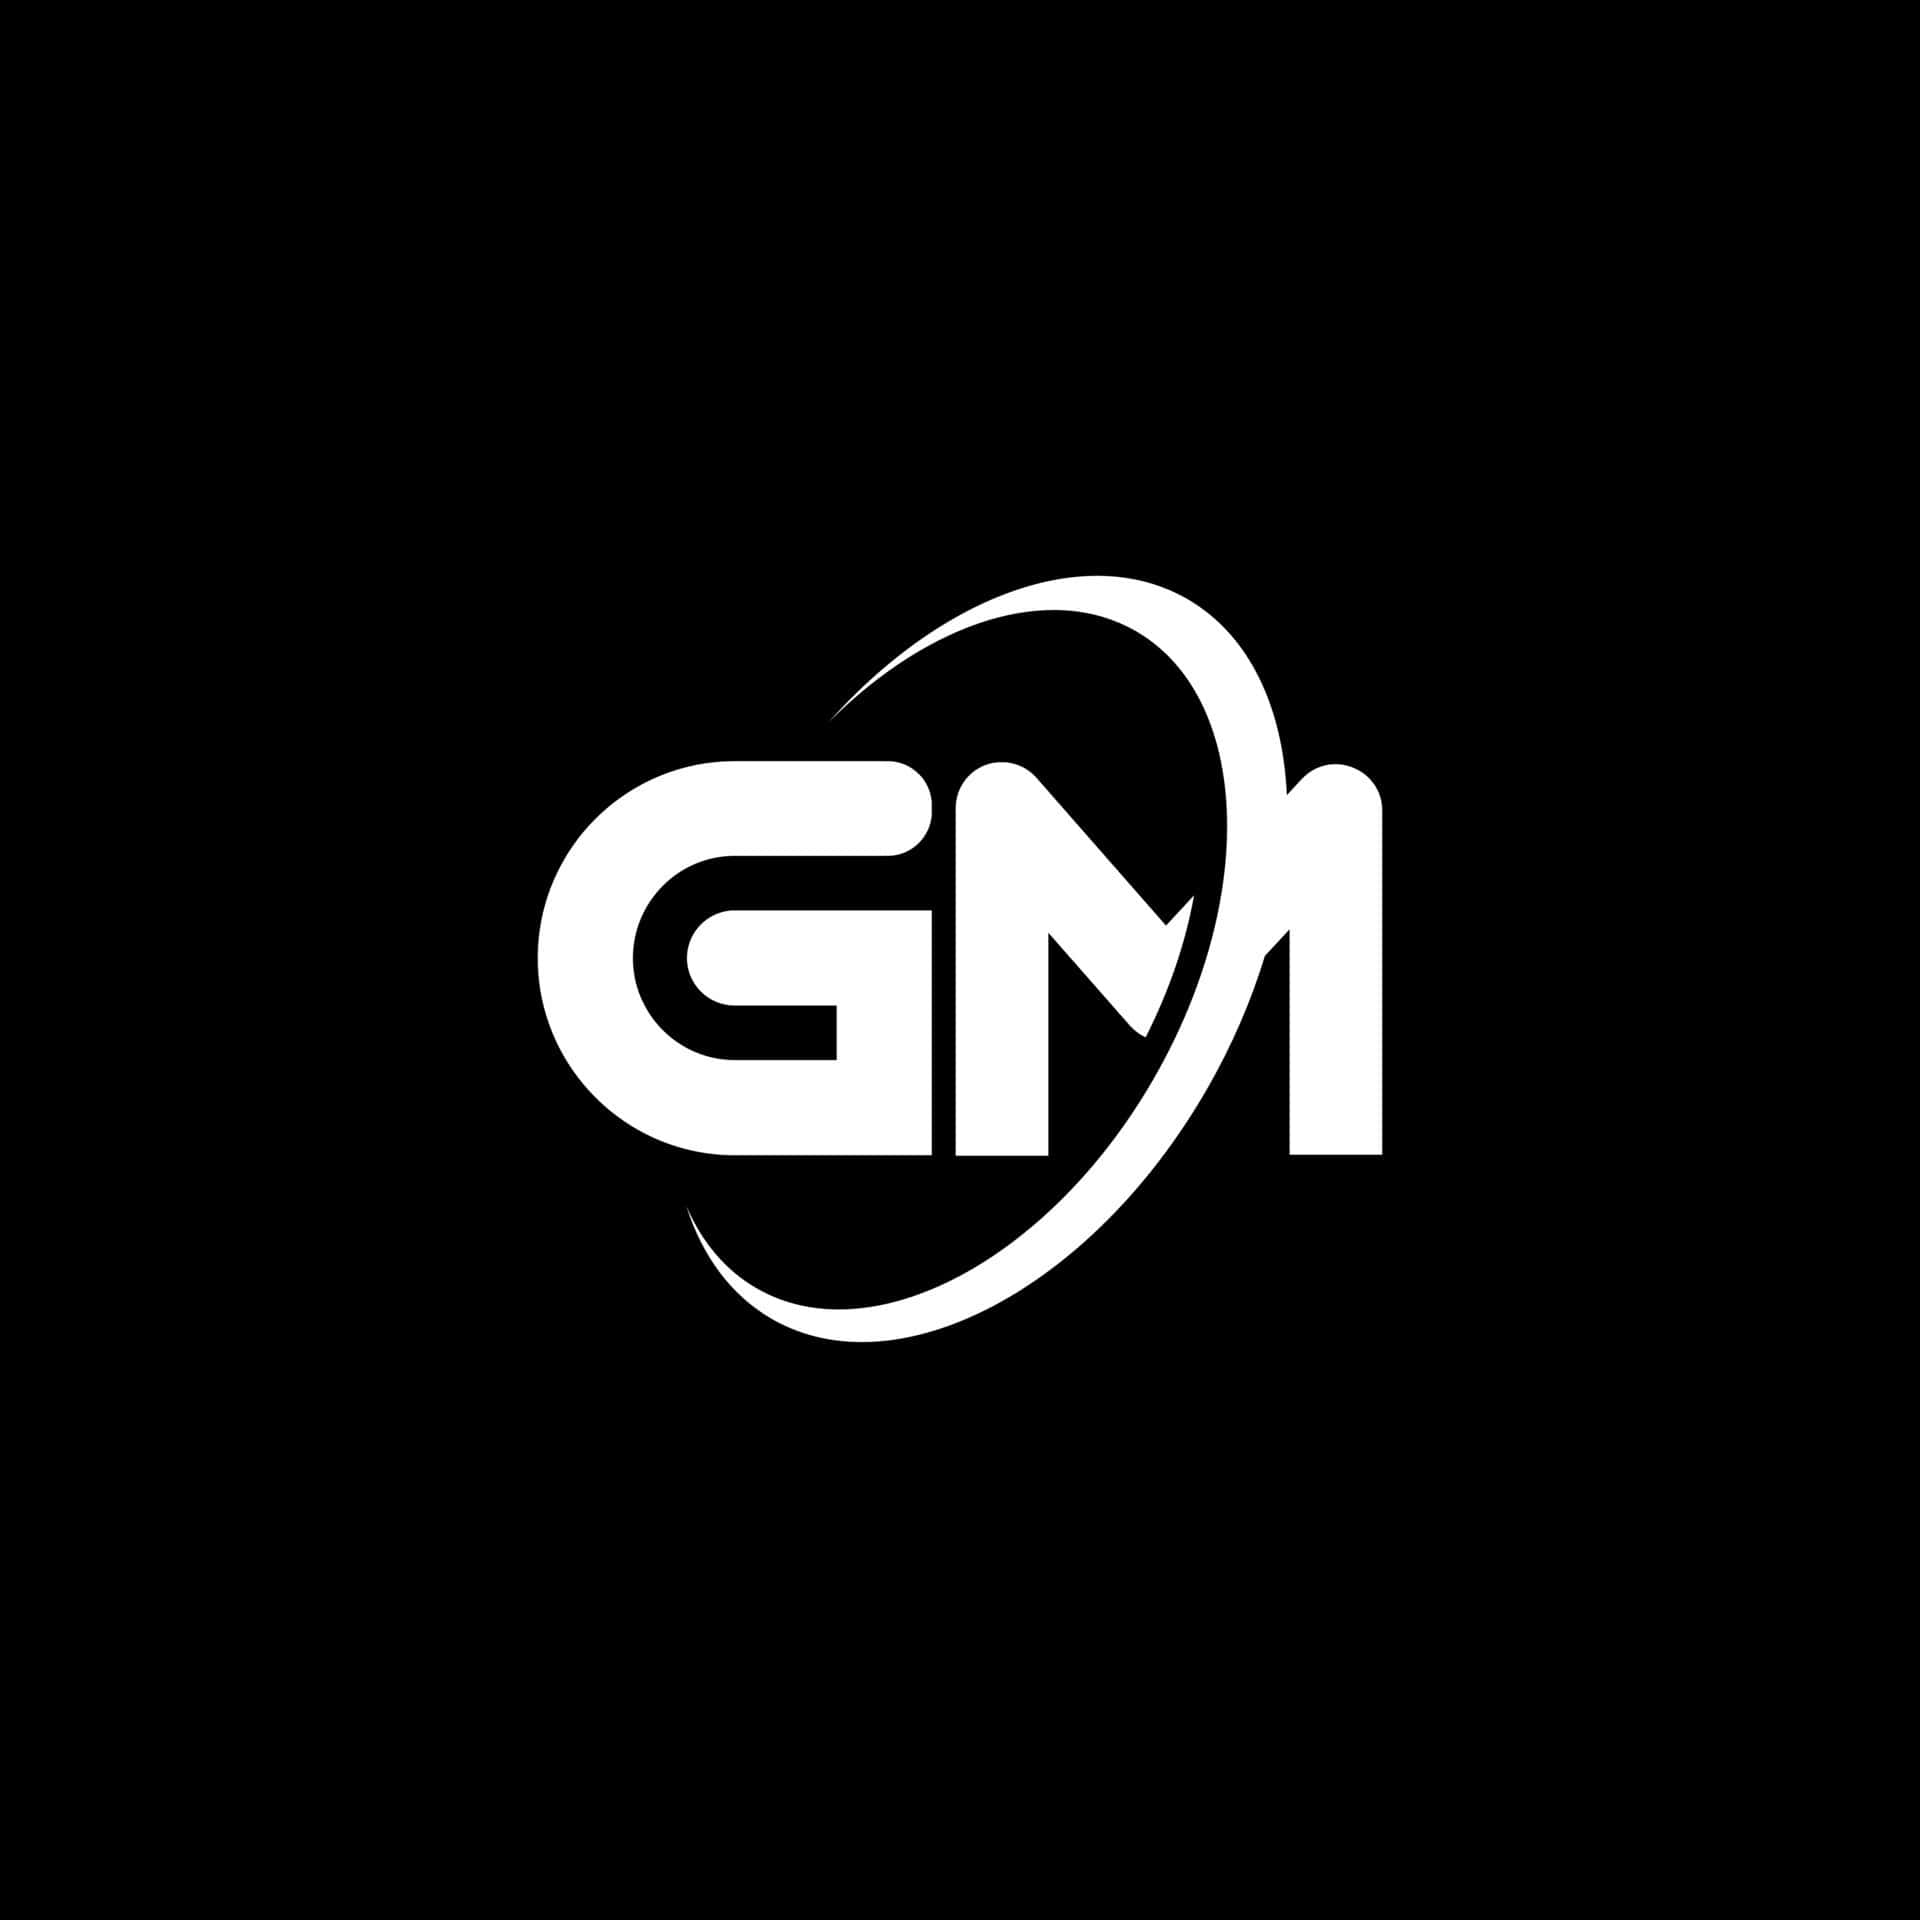 Download Logo With Initial Letters Of G And M Wallpaper